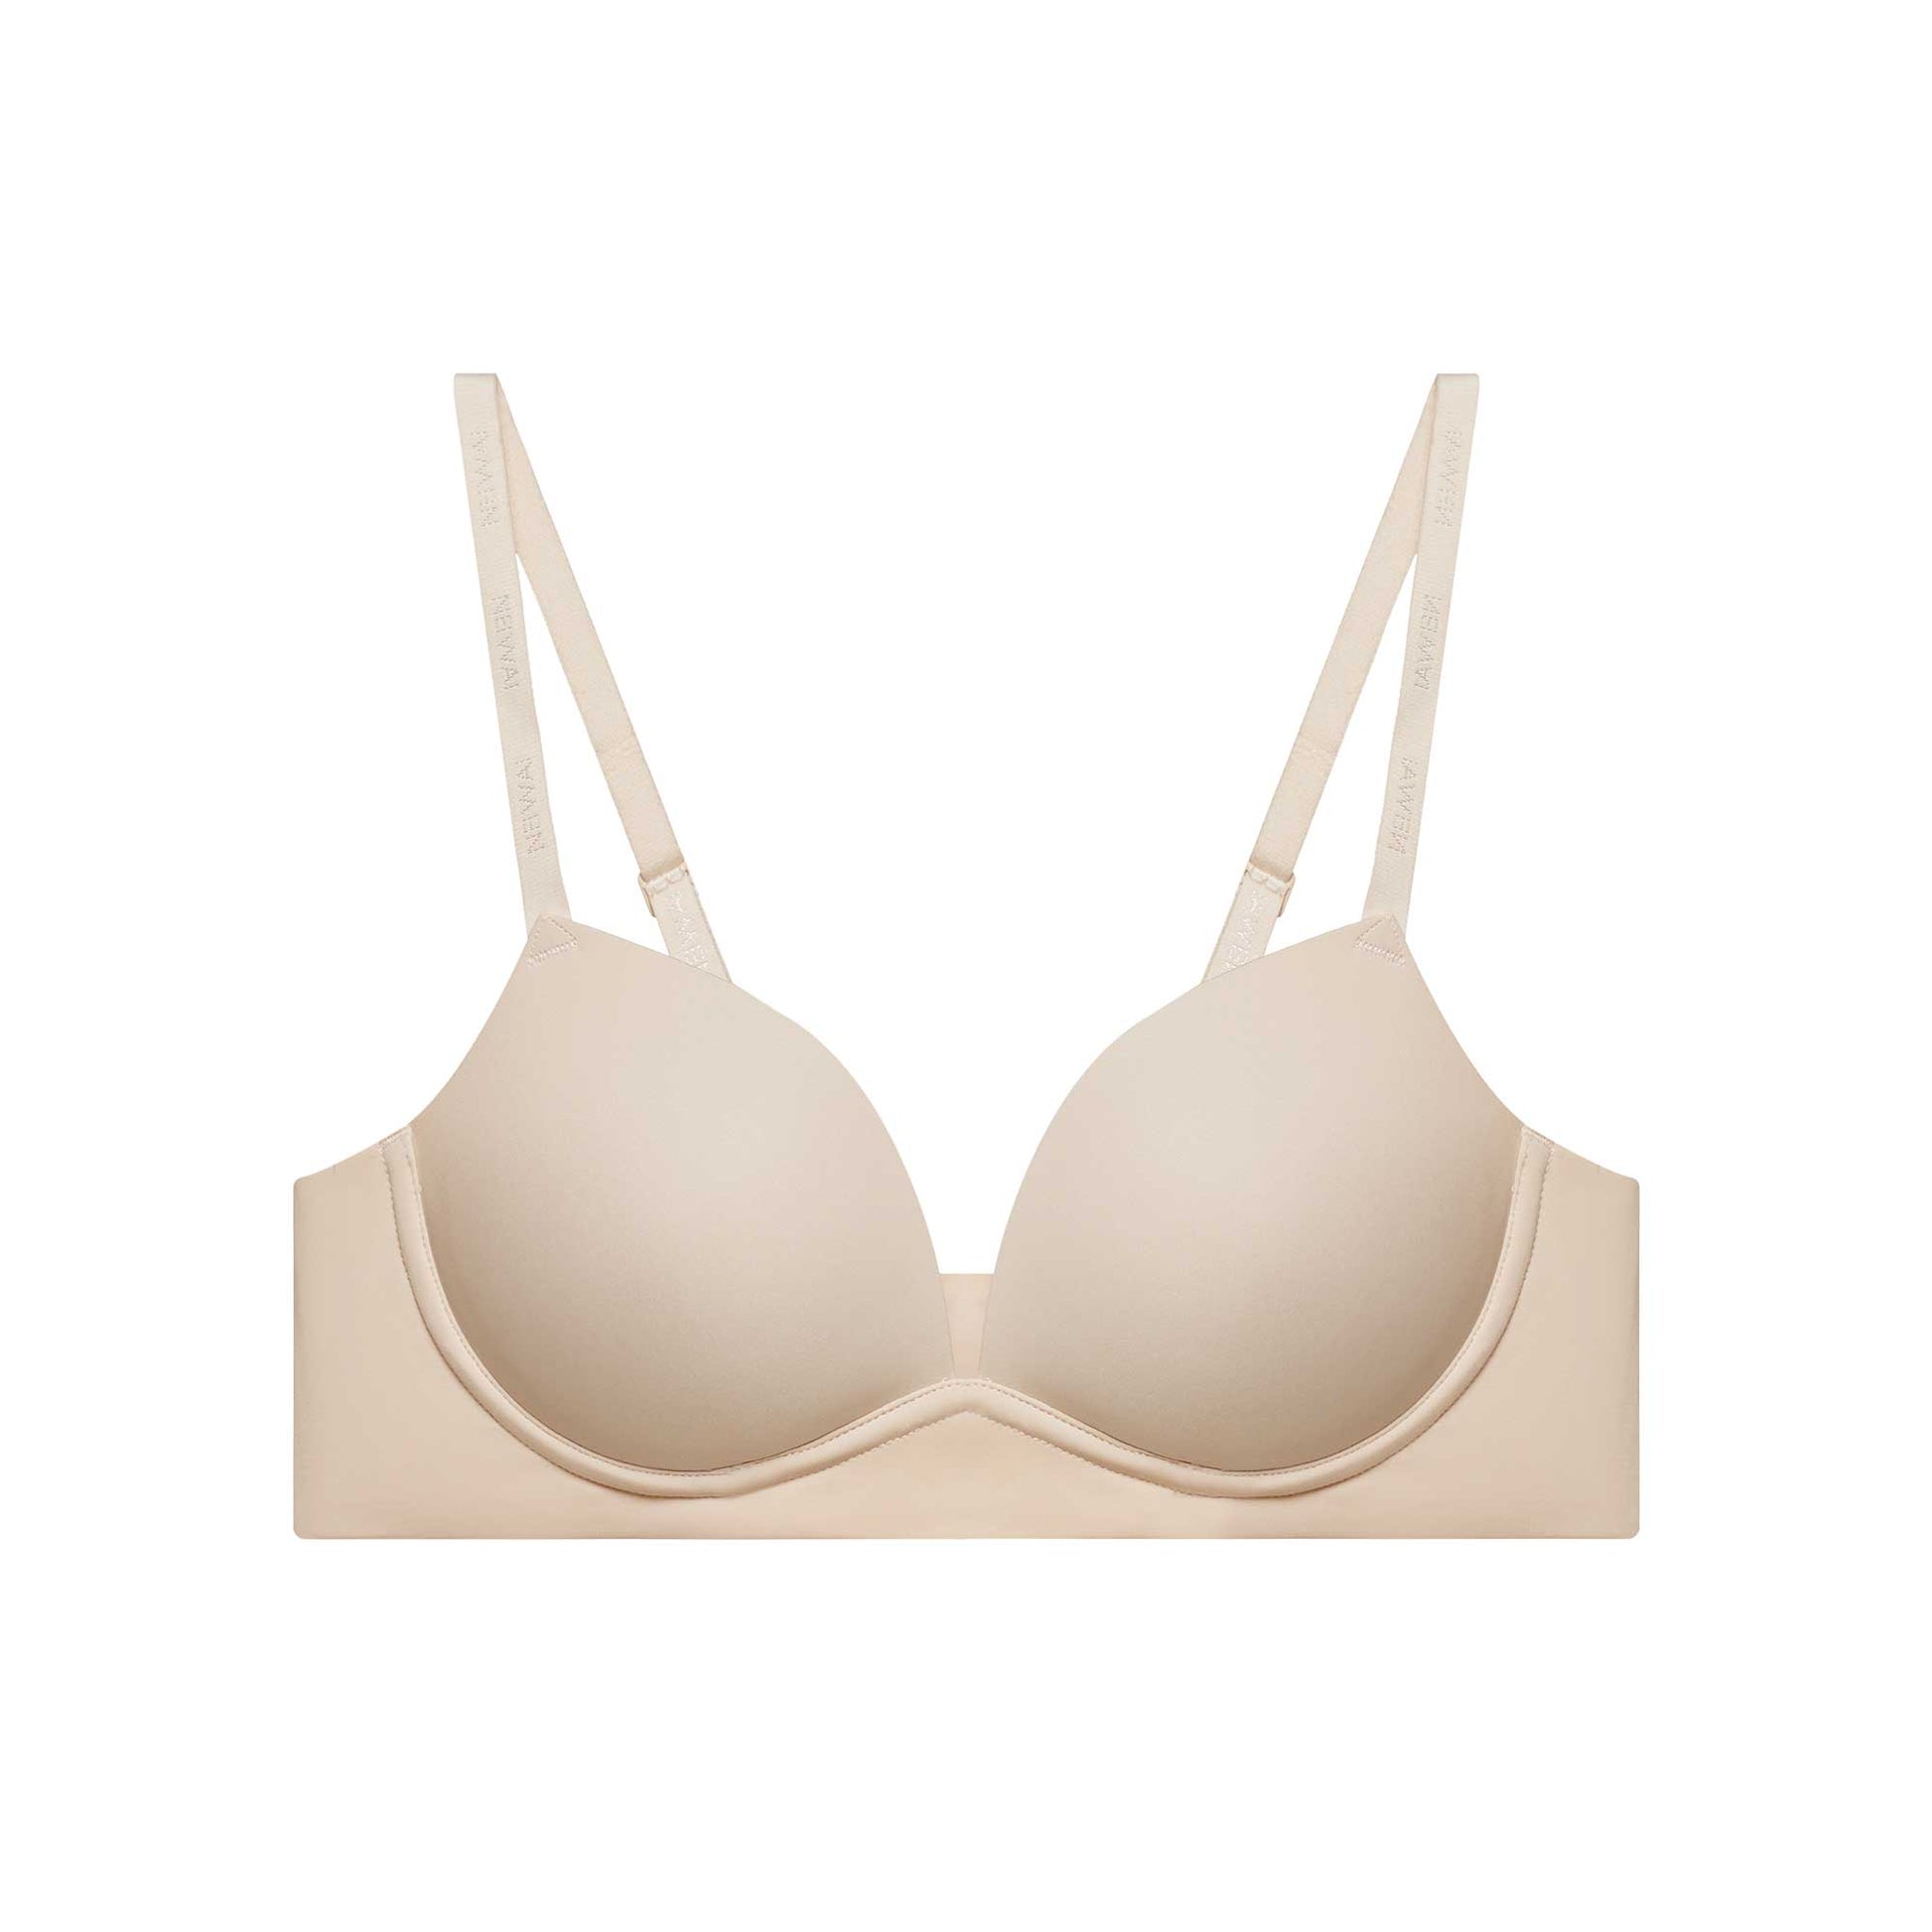 Winged Support ¾ Cup Bra